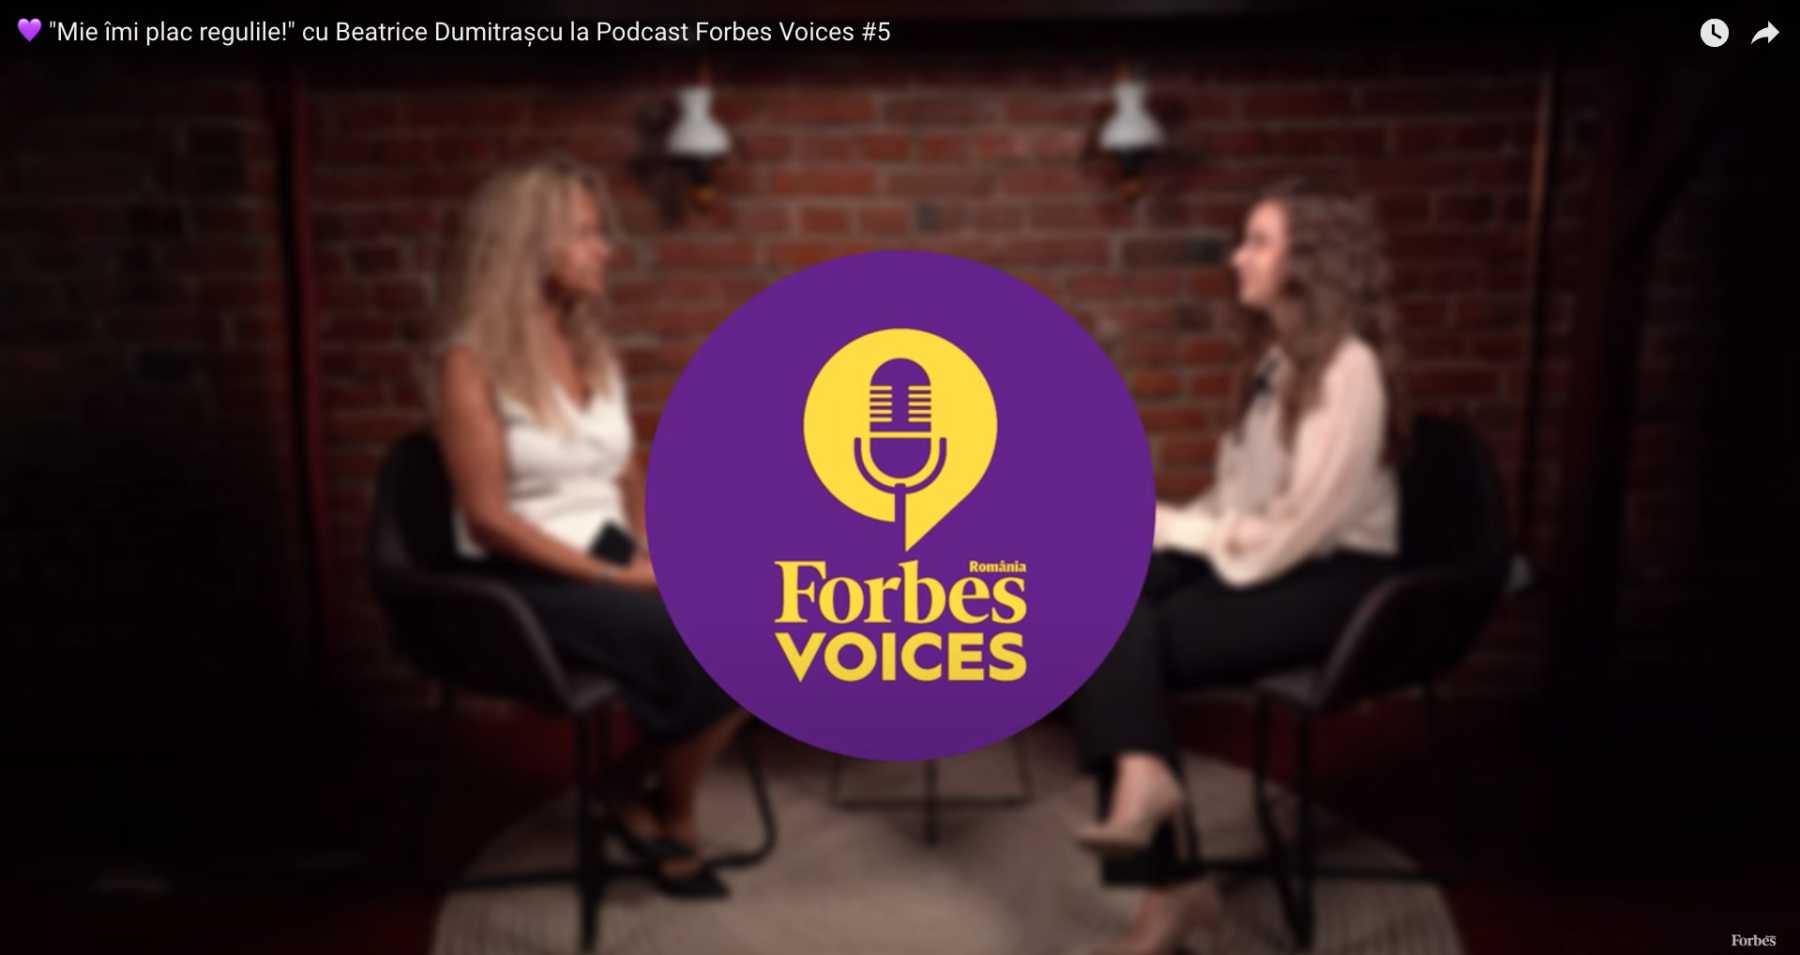 Beatrice Dumitrascu's inspiring journey on Forbes Voices Podcast